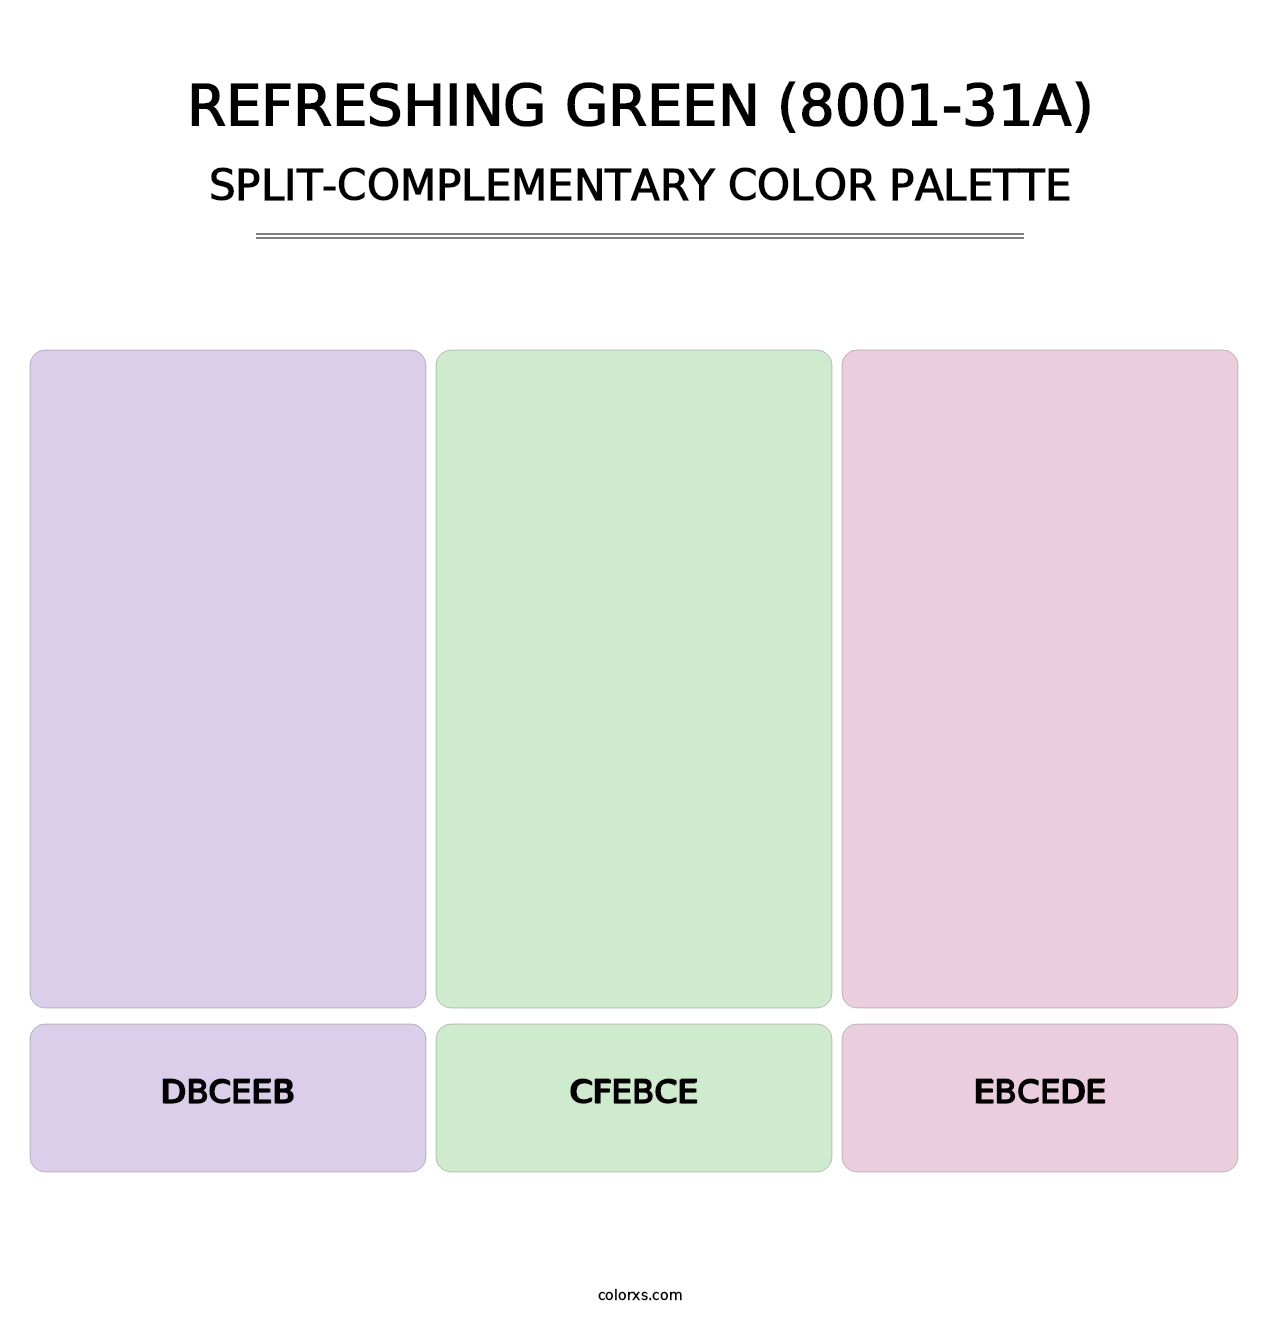 Refreshing Green (8001-31A) - Split-Complementary Color Palette